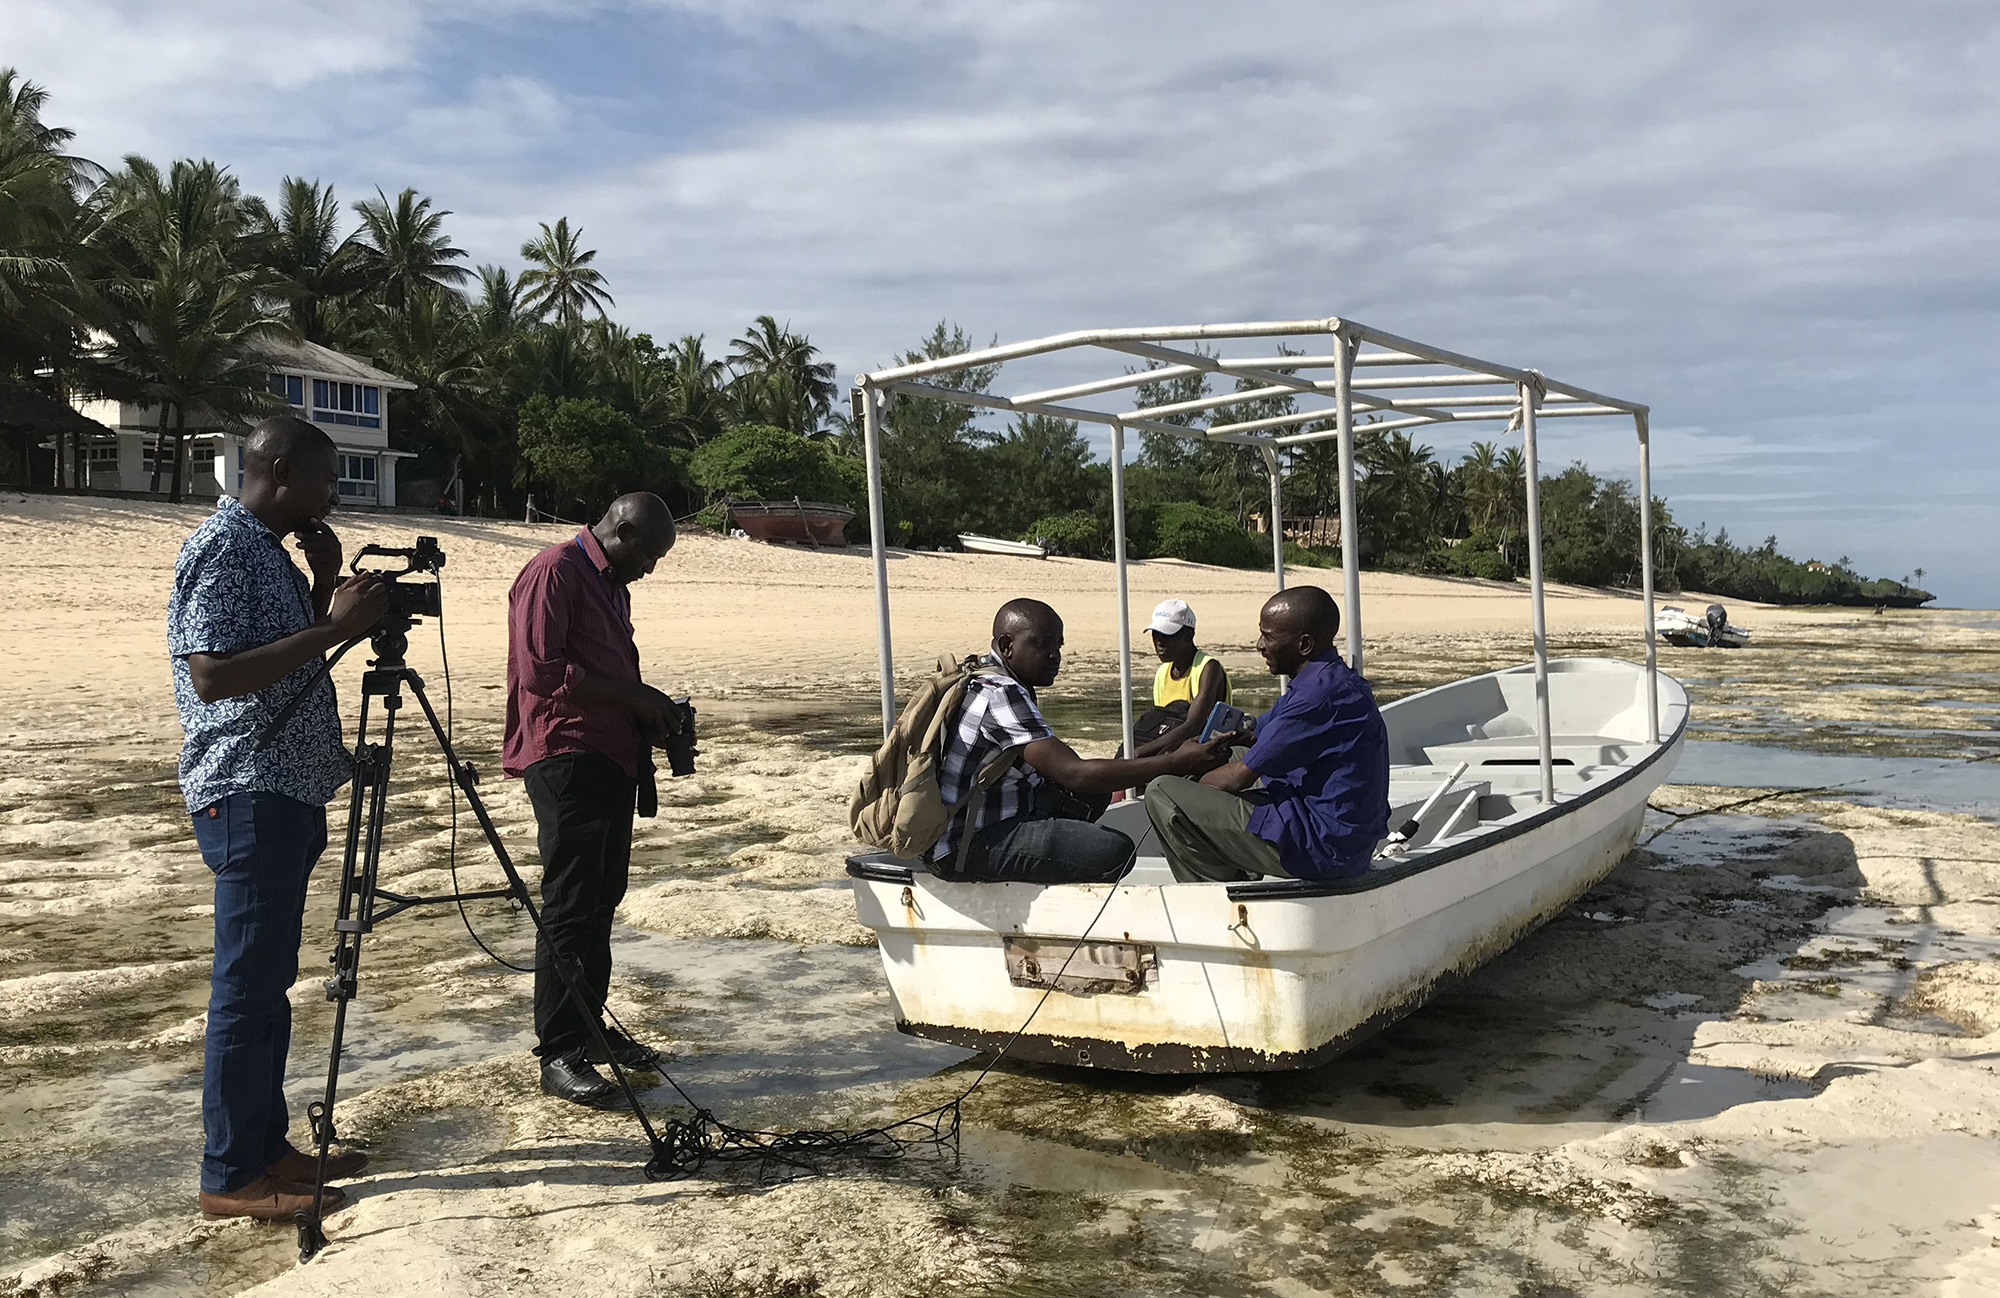 Two men stand interviewing 2 people sitting in a boat